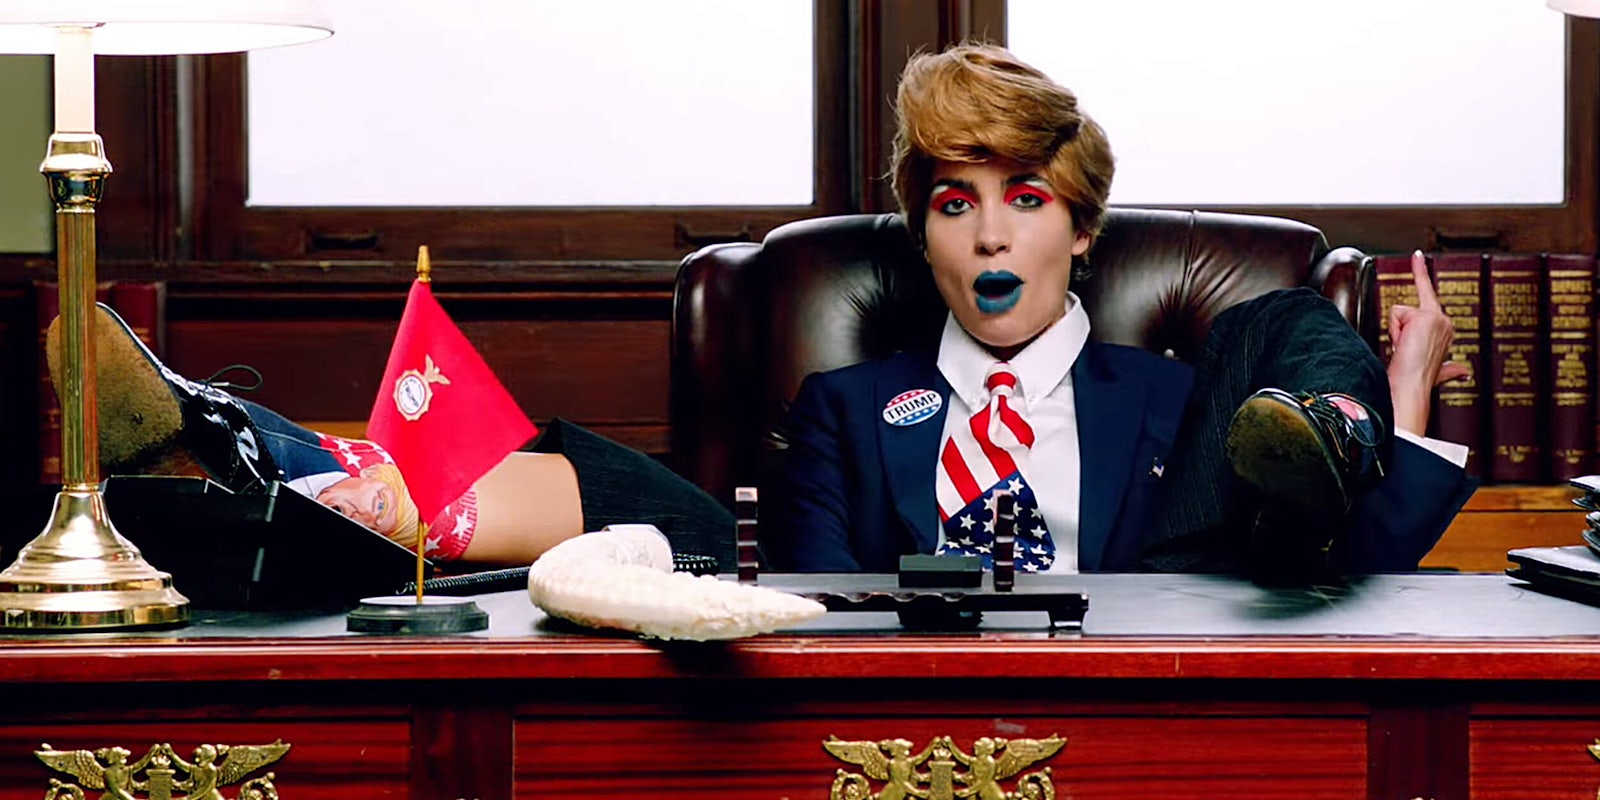 Singer from Pussy Riot sitting at desk dressed as Trump